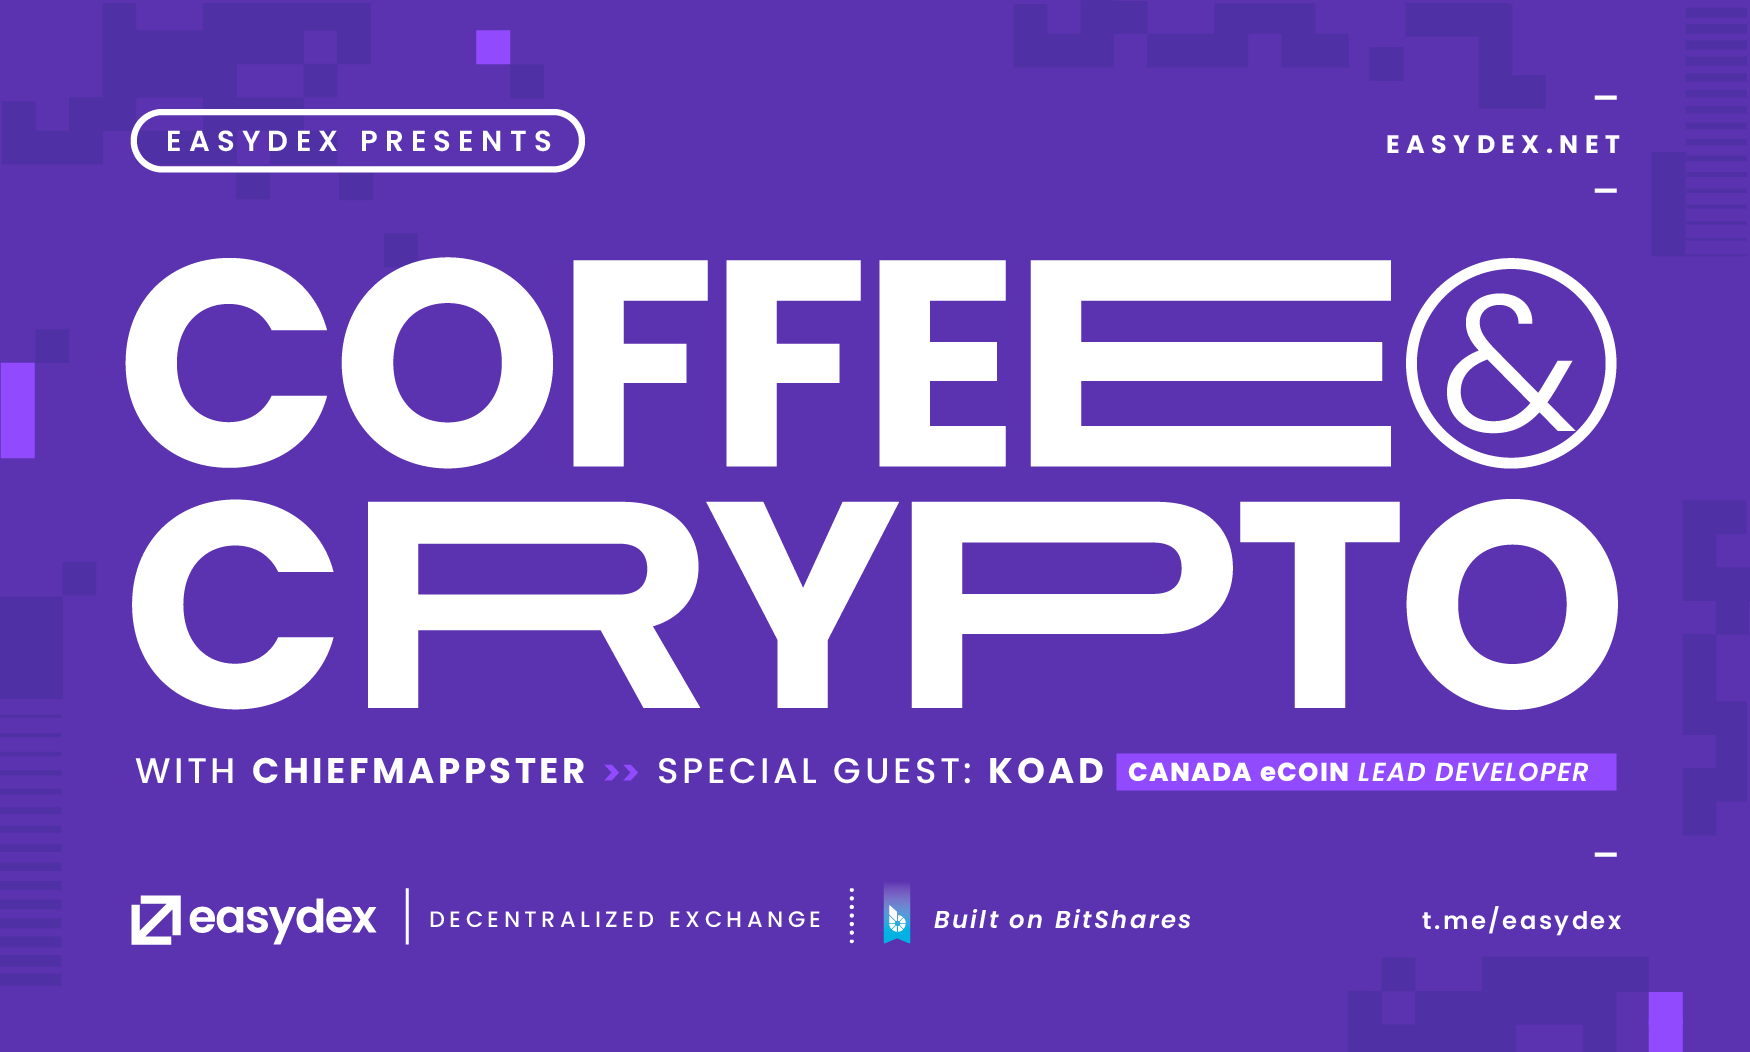 coffee-crypto-steemit-ecoindev-03.png